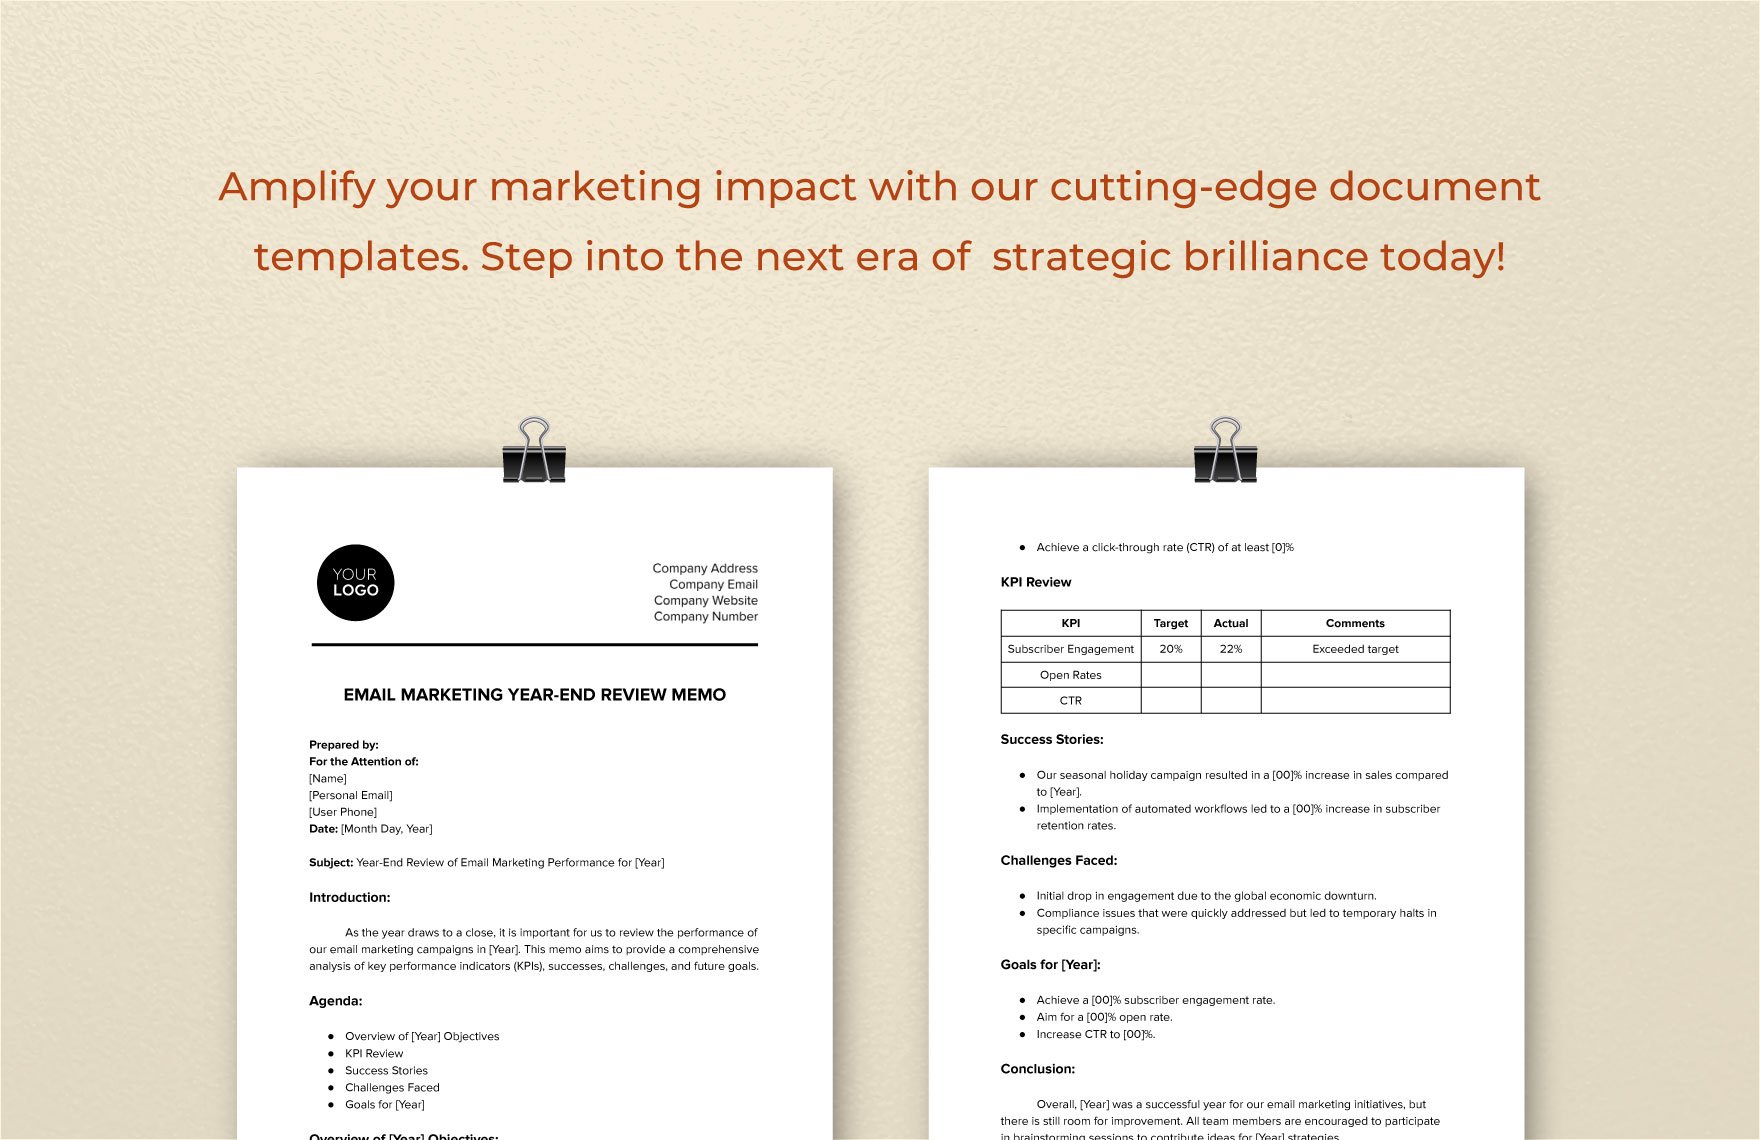 Email Marketing Year-End Review Memo Template